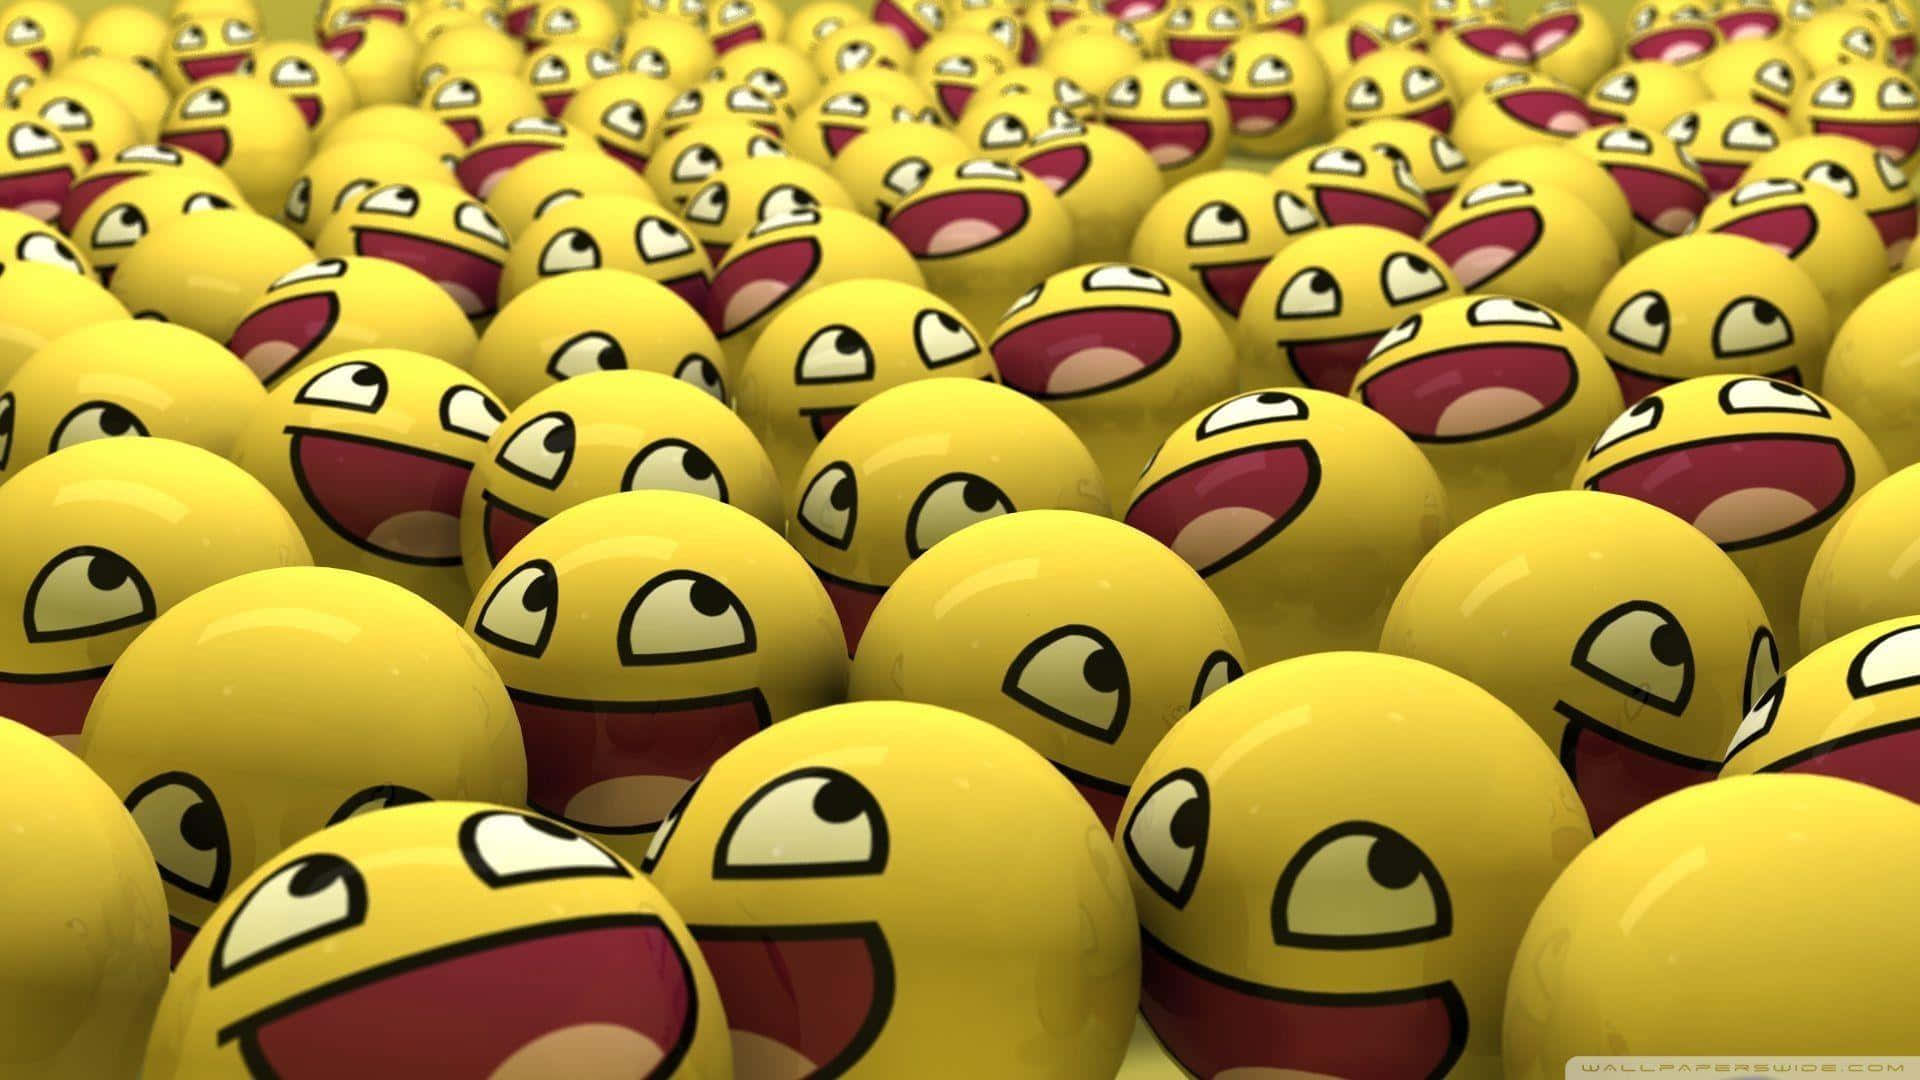 A Group Of Yellow Eggs With Faces And Eyes Wallpaper